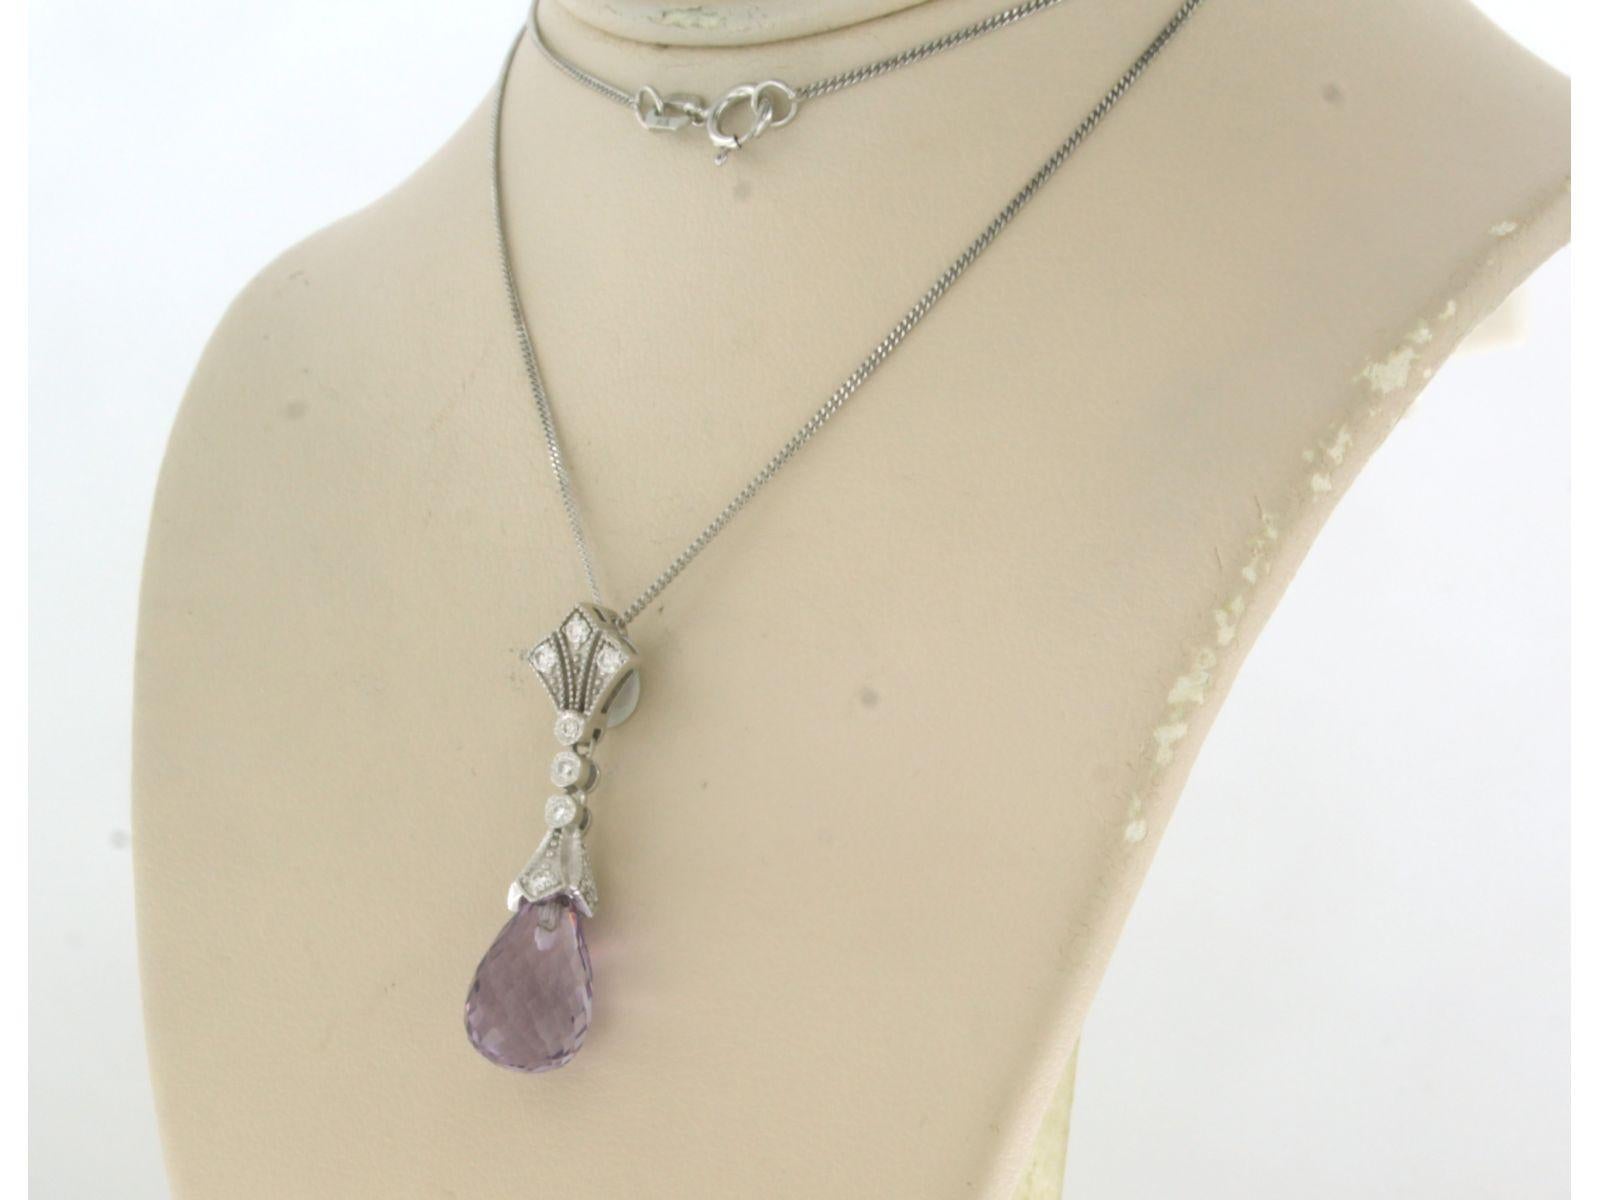 Brilliant Cut Chain and Pendant with Amethyst and diamonds 14k white gold